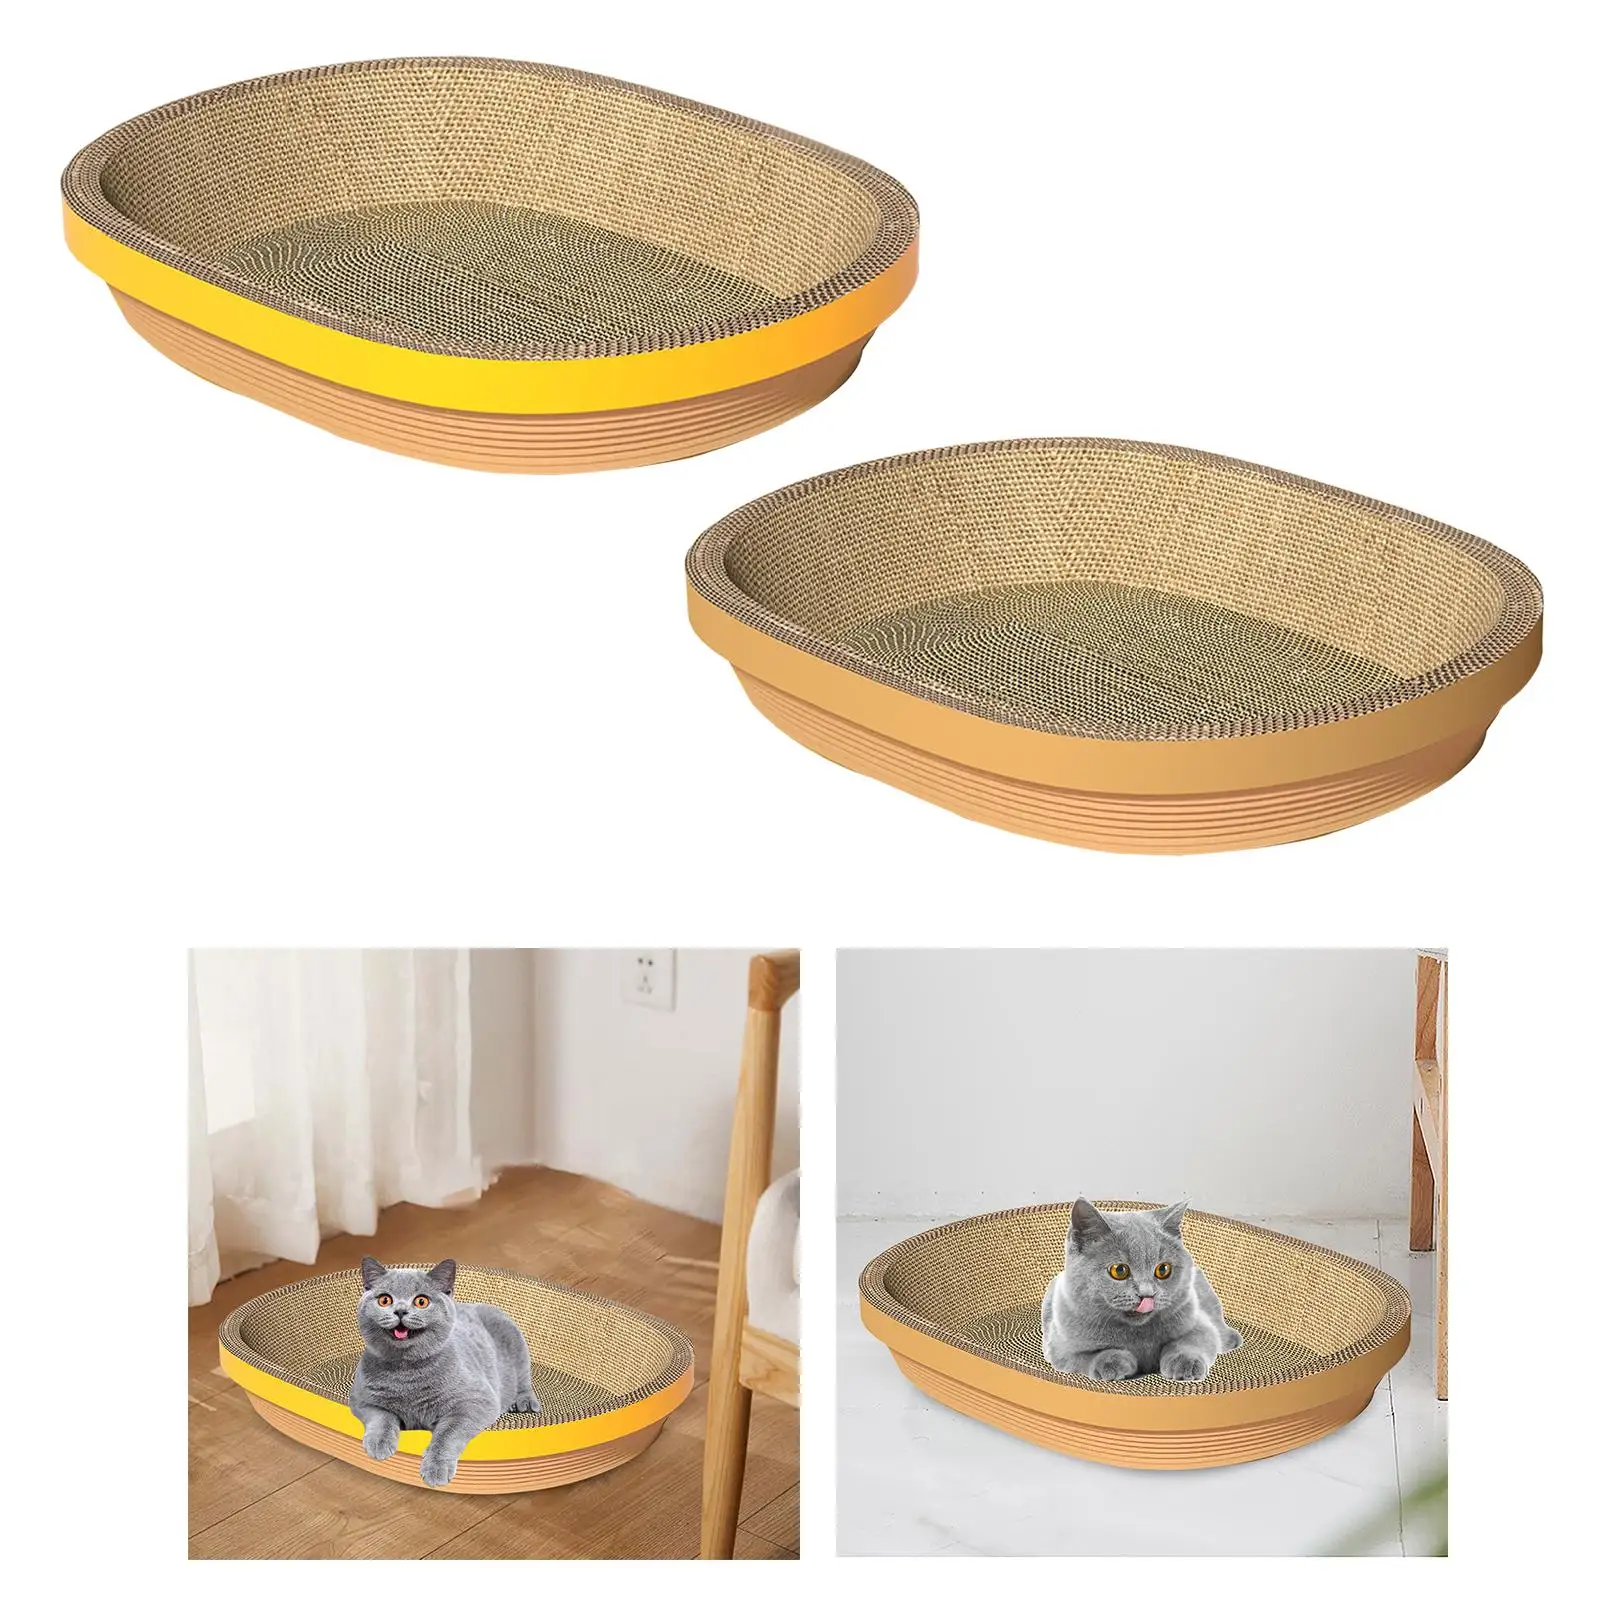 Cat Scratch Pad Thicken Corrugated Nest Bed Bowl Shaped Grind Claws